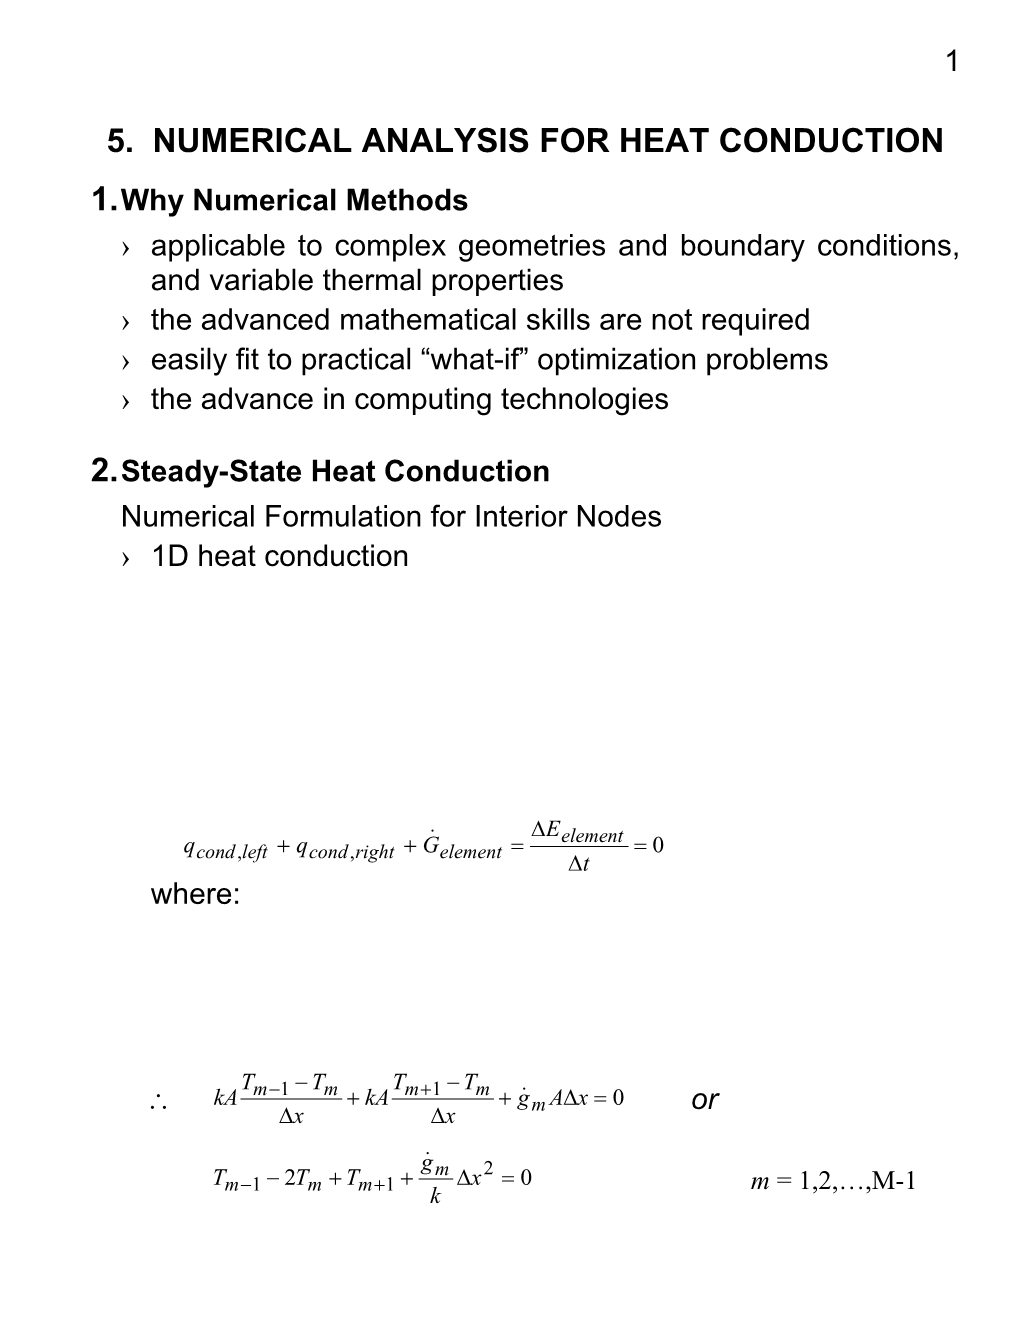 5. Numerical Analysis for Heat Conduction